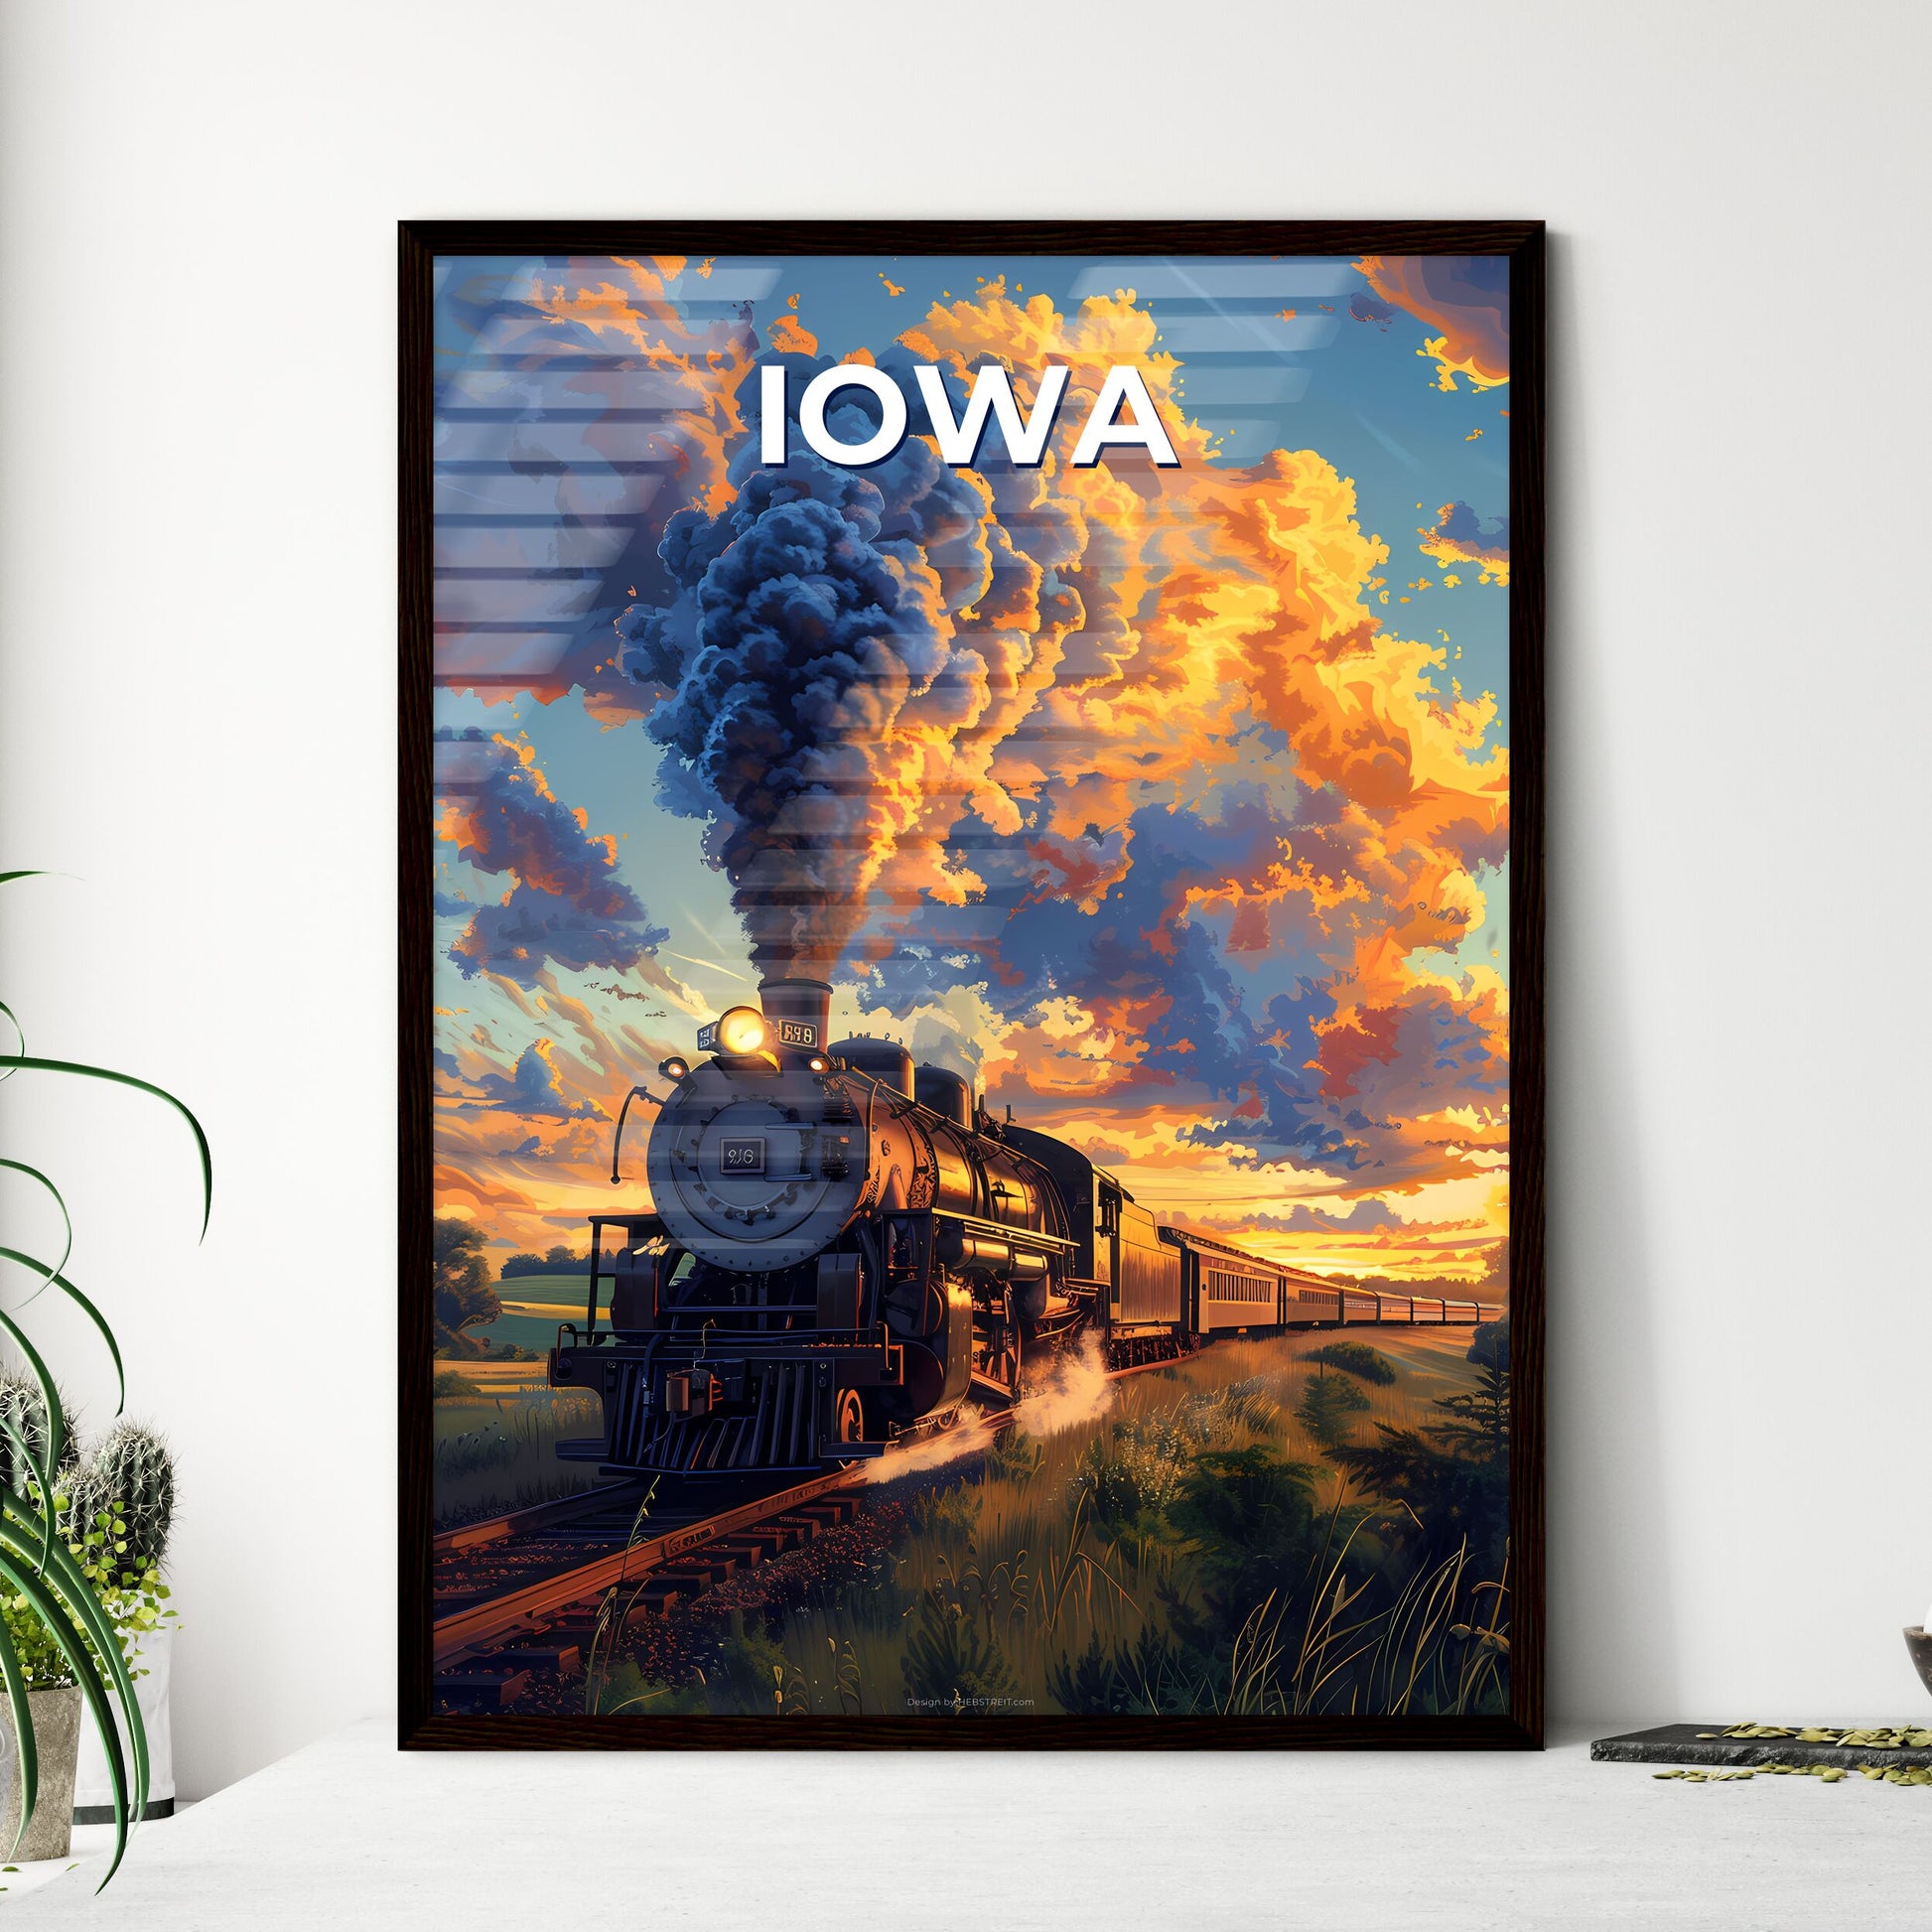 Vibrant Railroad Painting: Artful Depiction of Iowa's Train Tracks with Billowing Engine Smoke